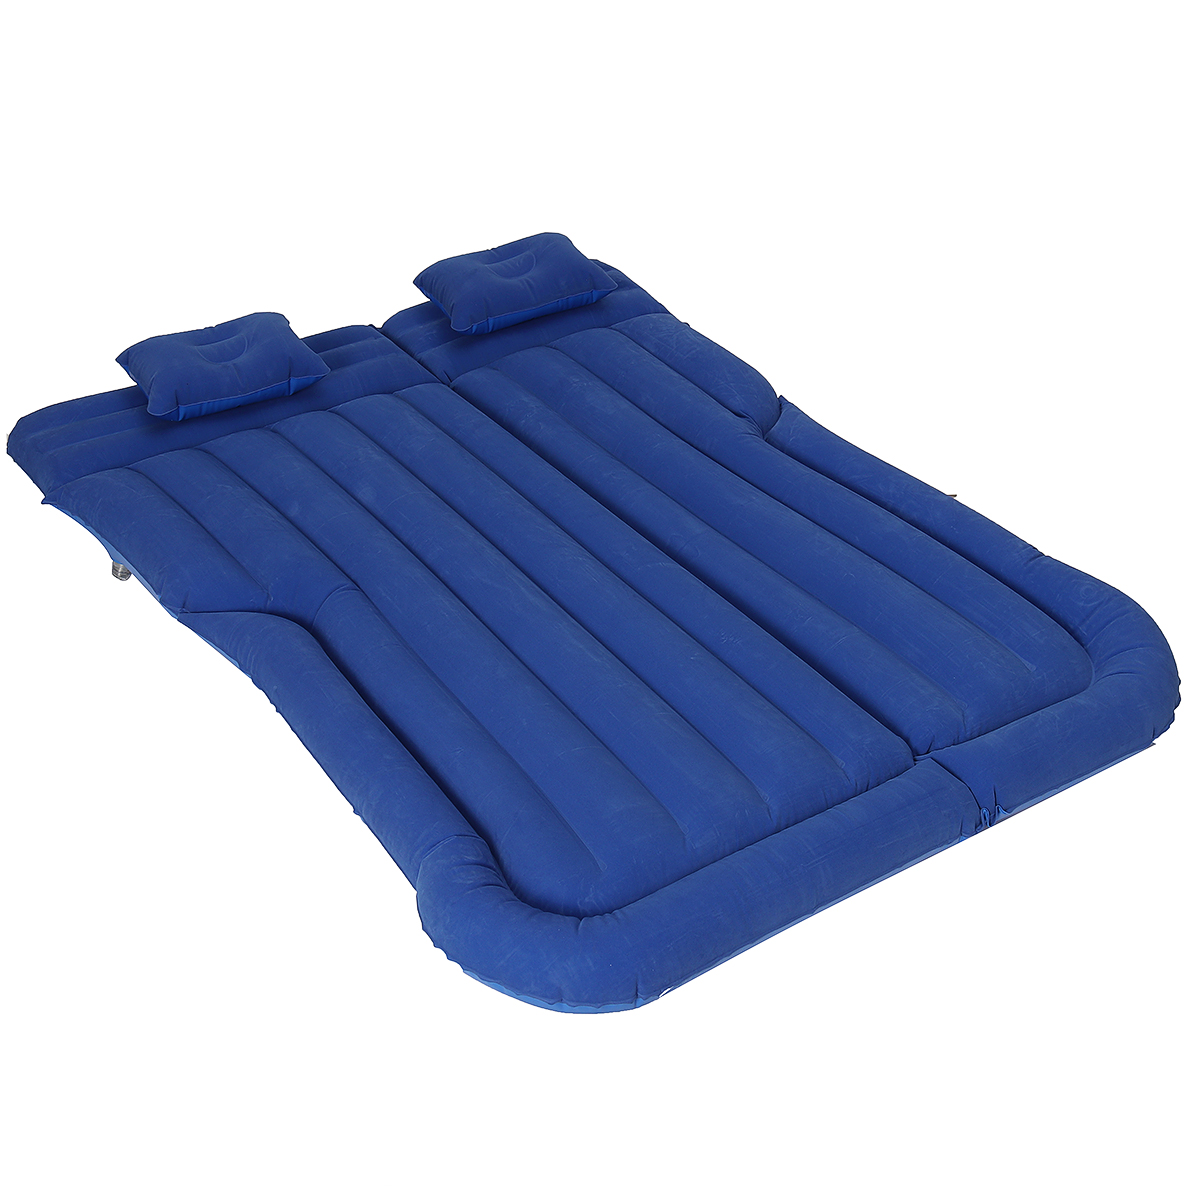 180x130cm-Multifunctional-Inflatable-Car-Air-Mattress-Durable-Back-Seat-Cover-Travel-Bed-Moisture-pr-1888970-12